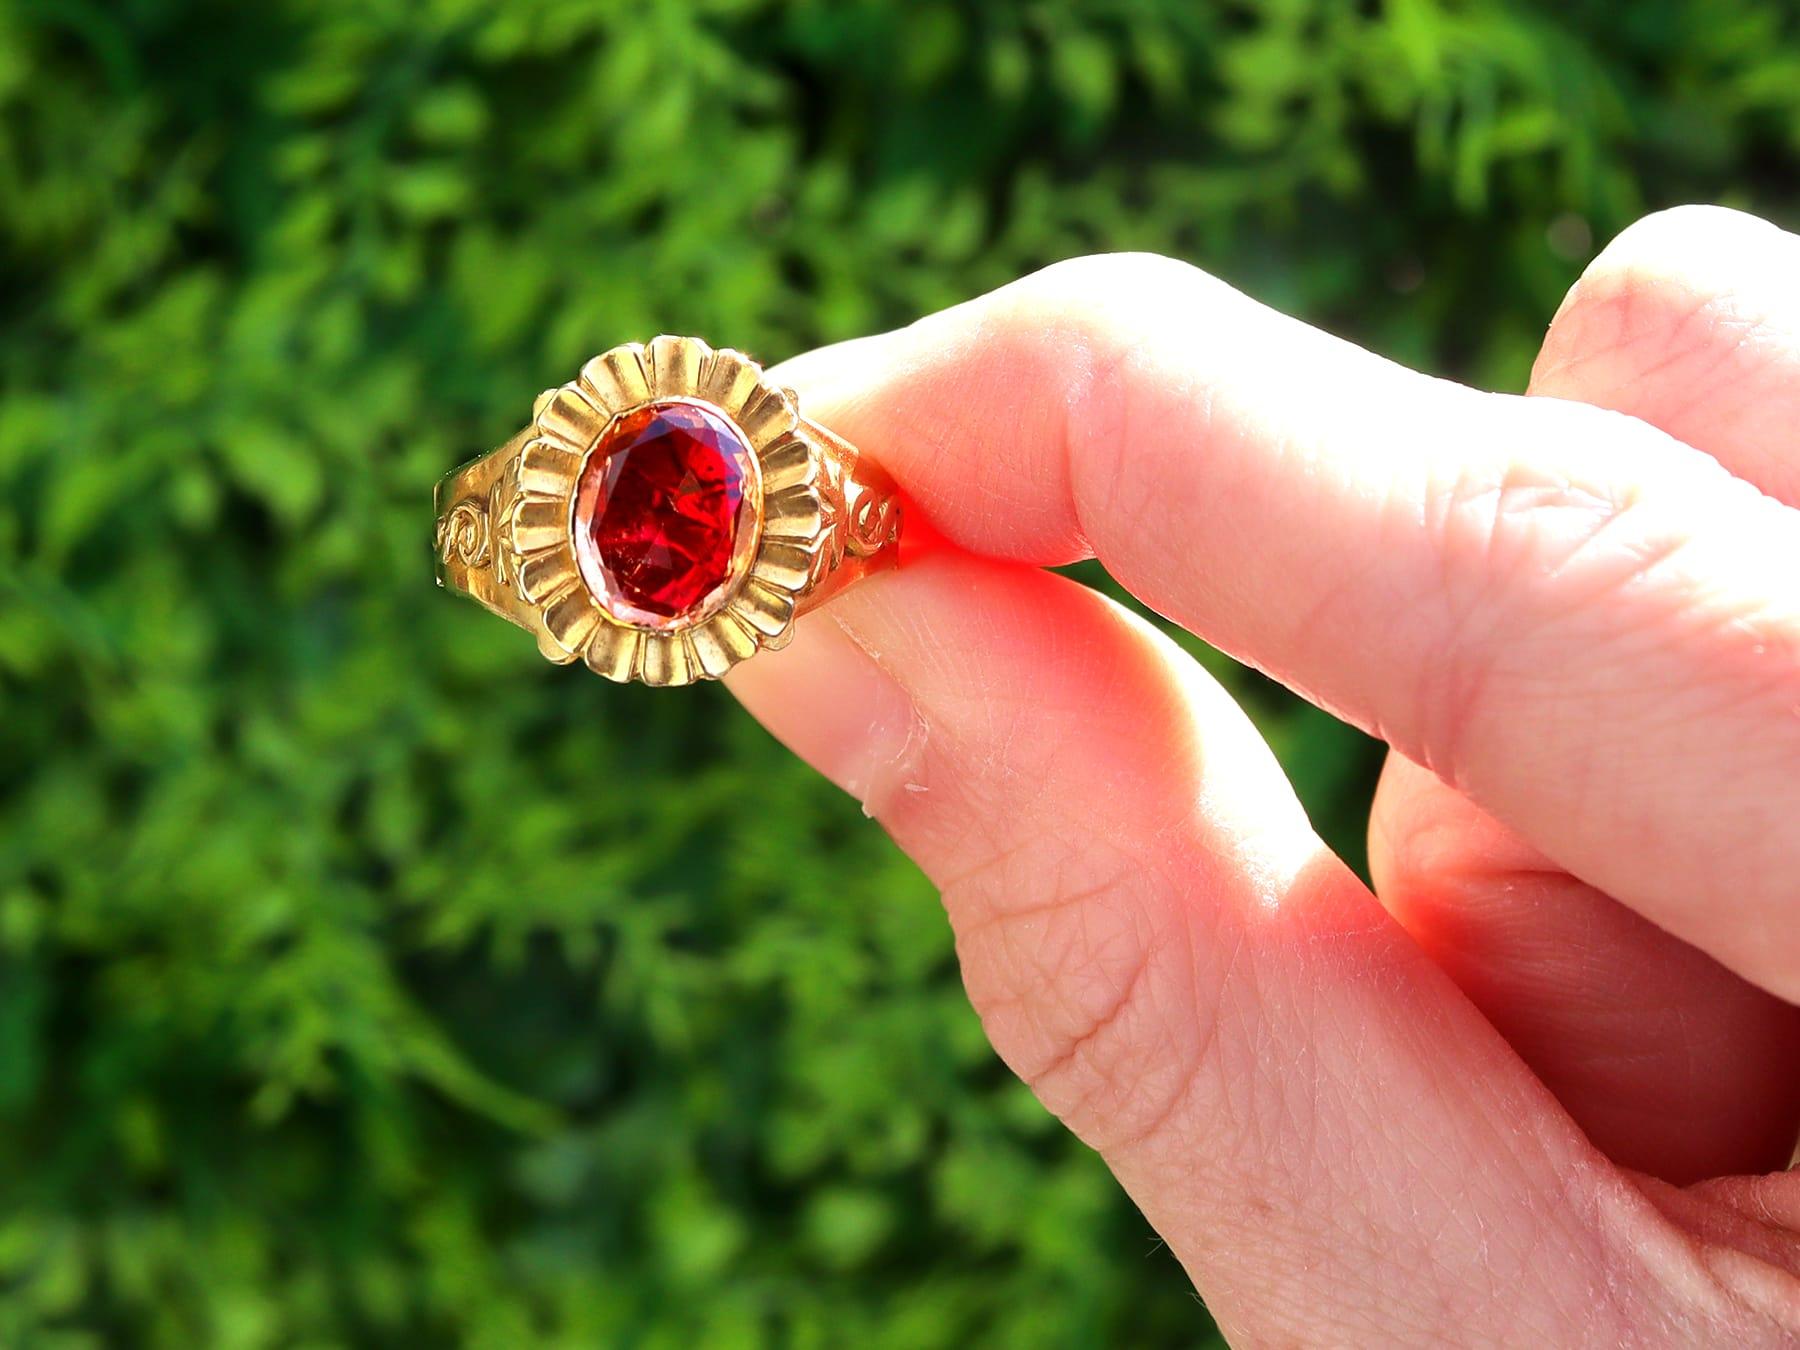 A fine and impressive antique 3.71 carat garnet and 18 karat yellow gold dress ring; part of our diverse Victorian jewellery and estate jewelry collections.

This fine and impressive antique garnet ring has been crafted in 18k yellow gold.

The